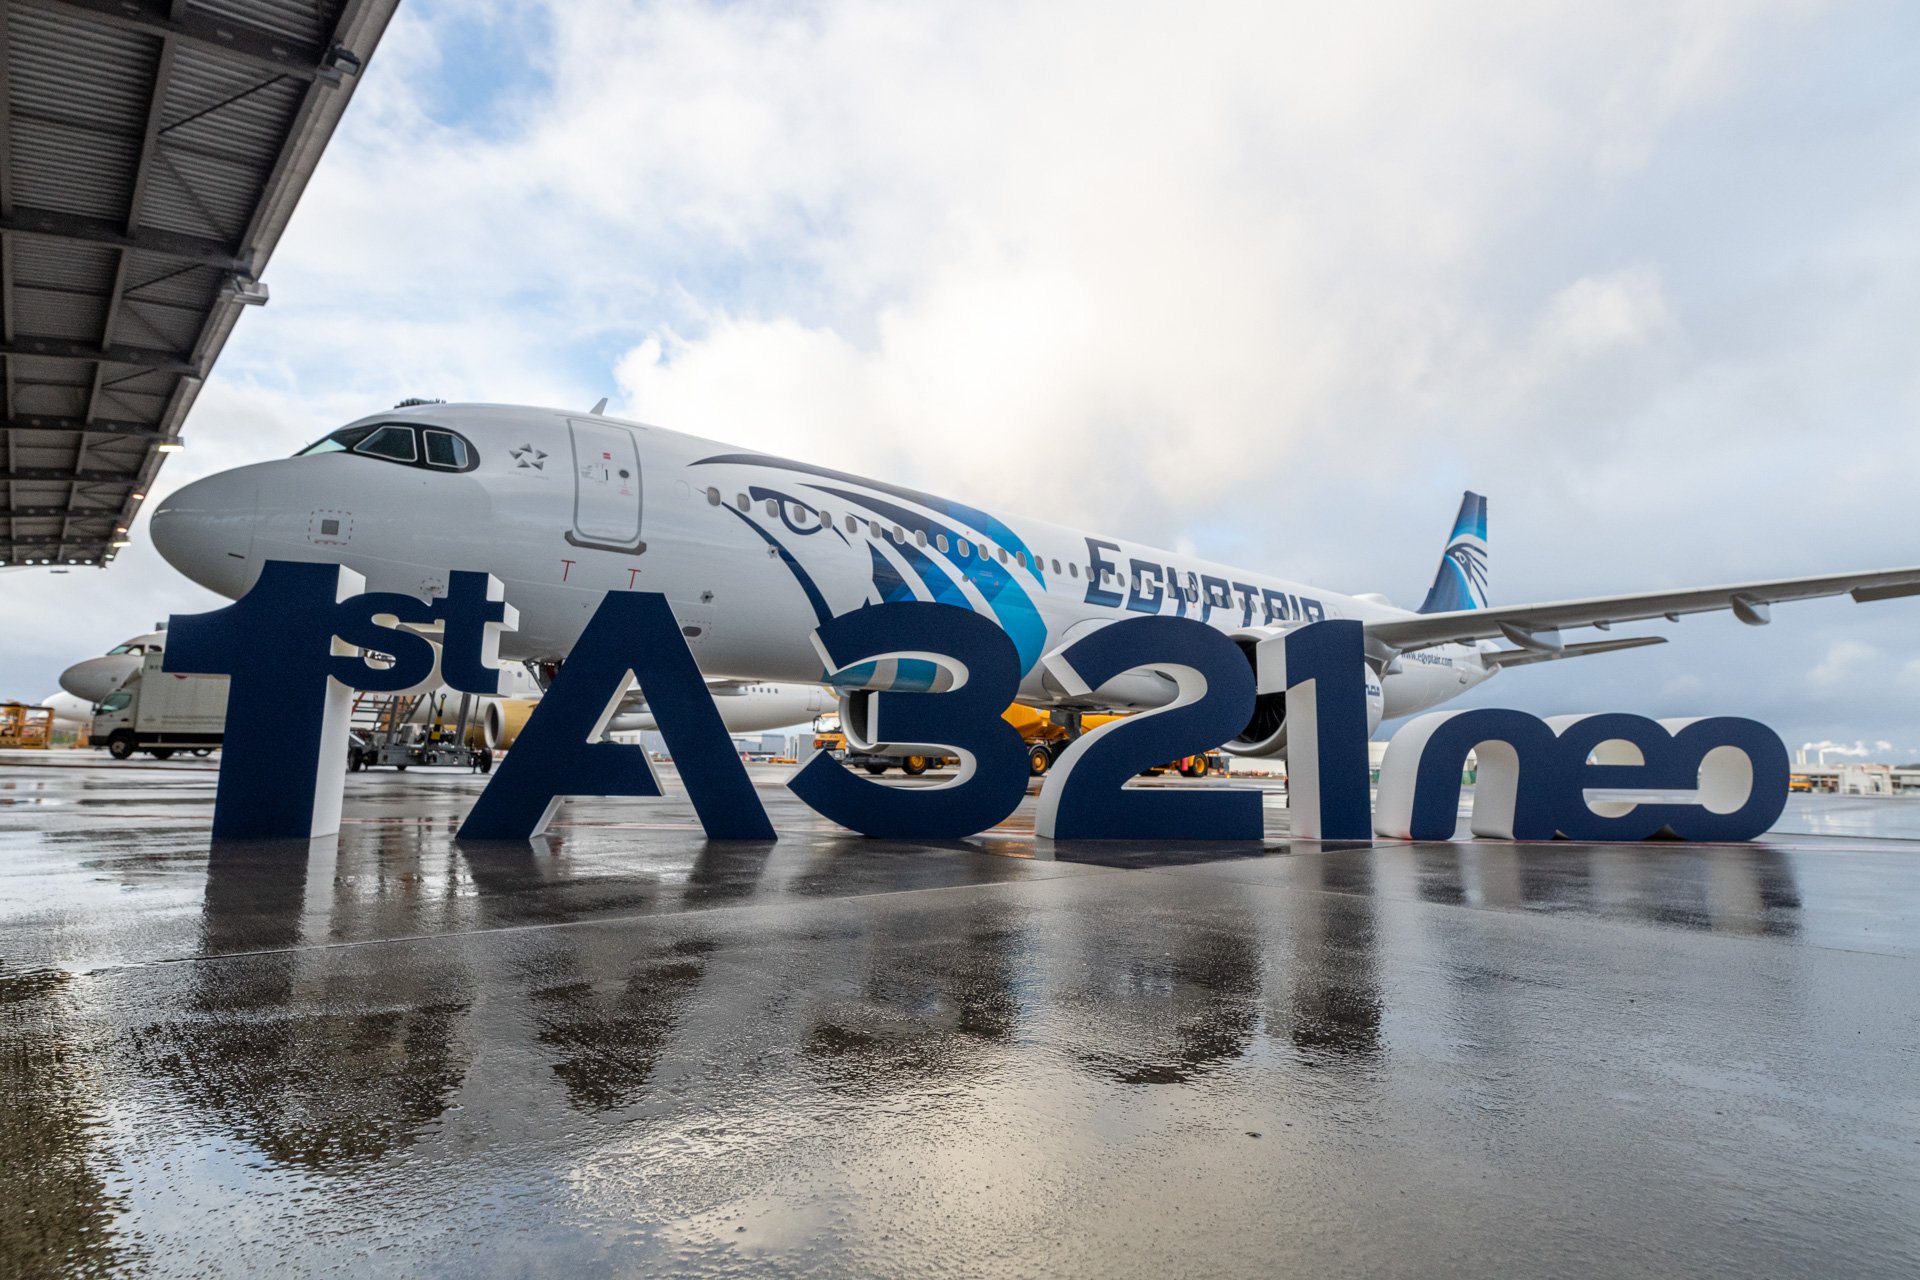 EGYPTAIR takes delivery of Africa’s first Airbus A321neo